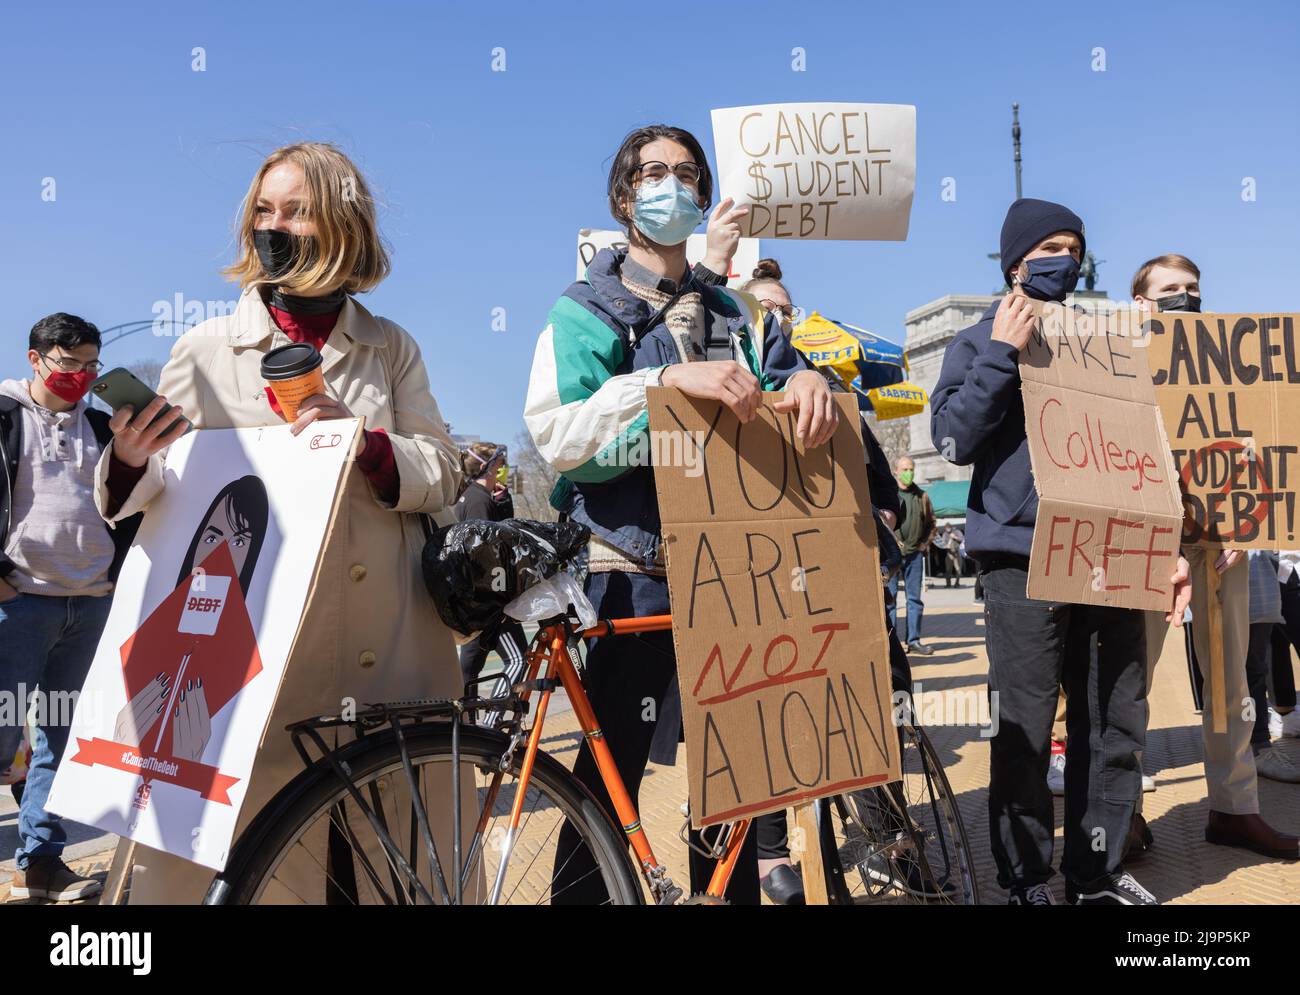 BROOKLYN, N.Y. – April 3, 2021: Demonstrators protest near Grand Army Plaza during a rally to cancel student loan debts. Stock Photo